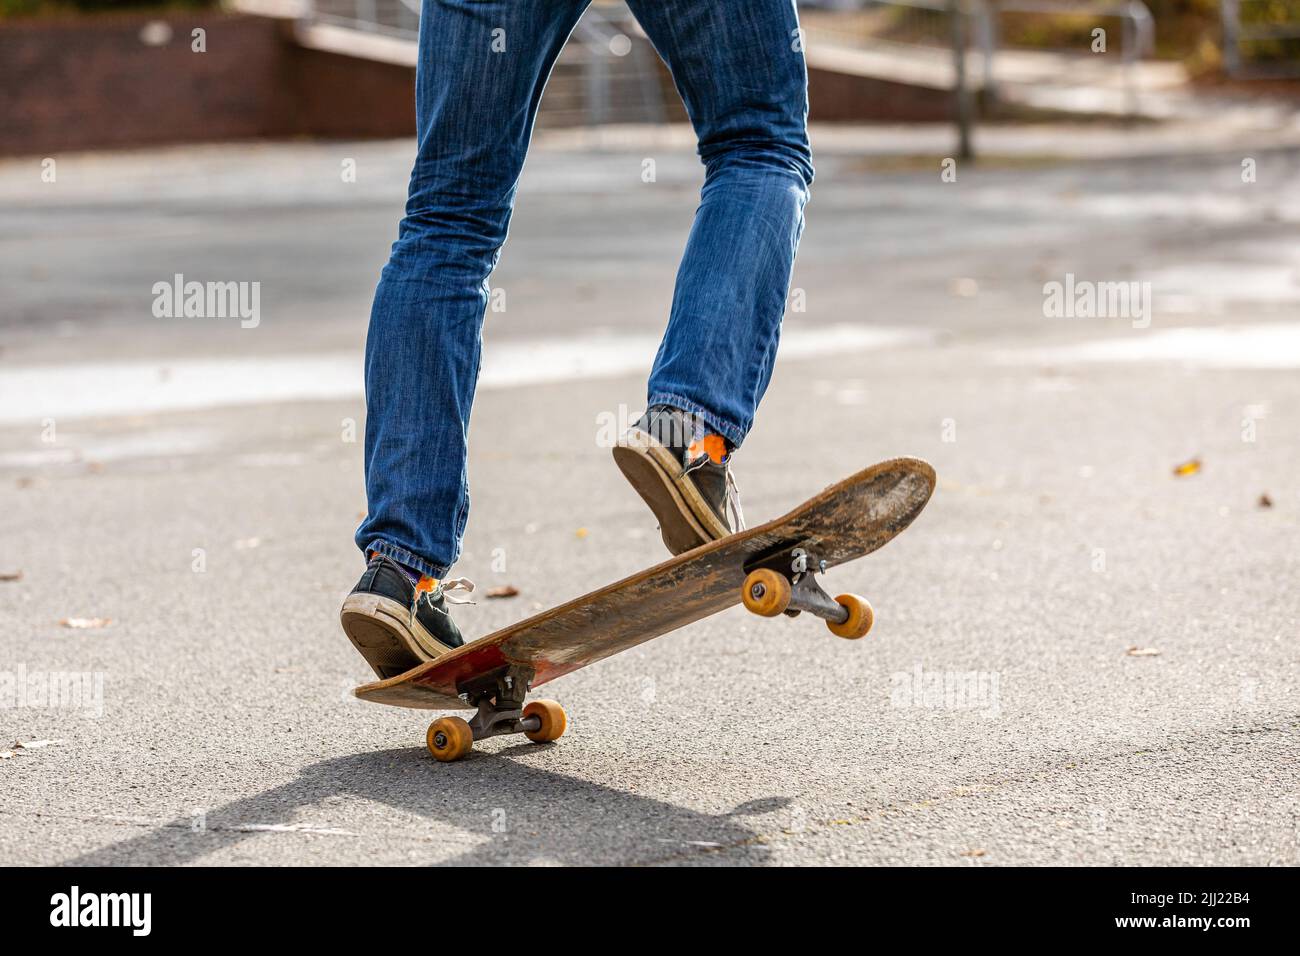 A person doing a kickflip with the skateboard Stock Photo